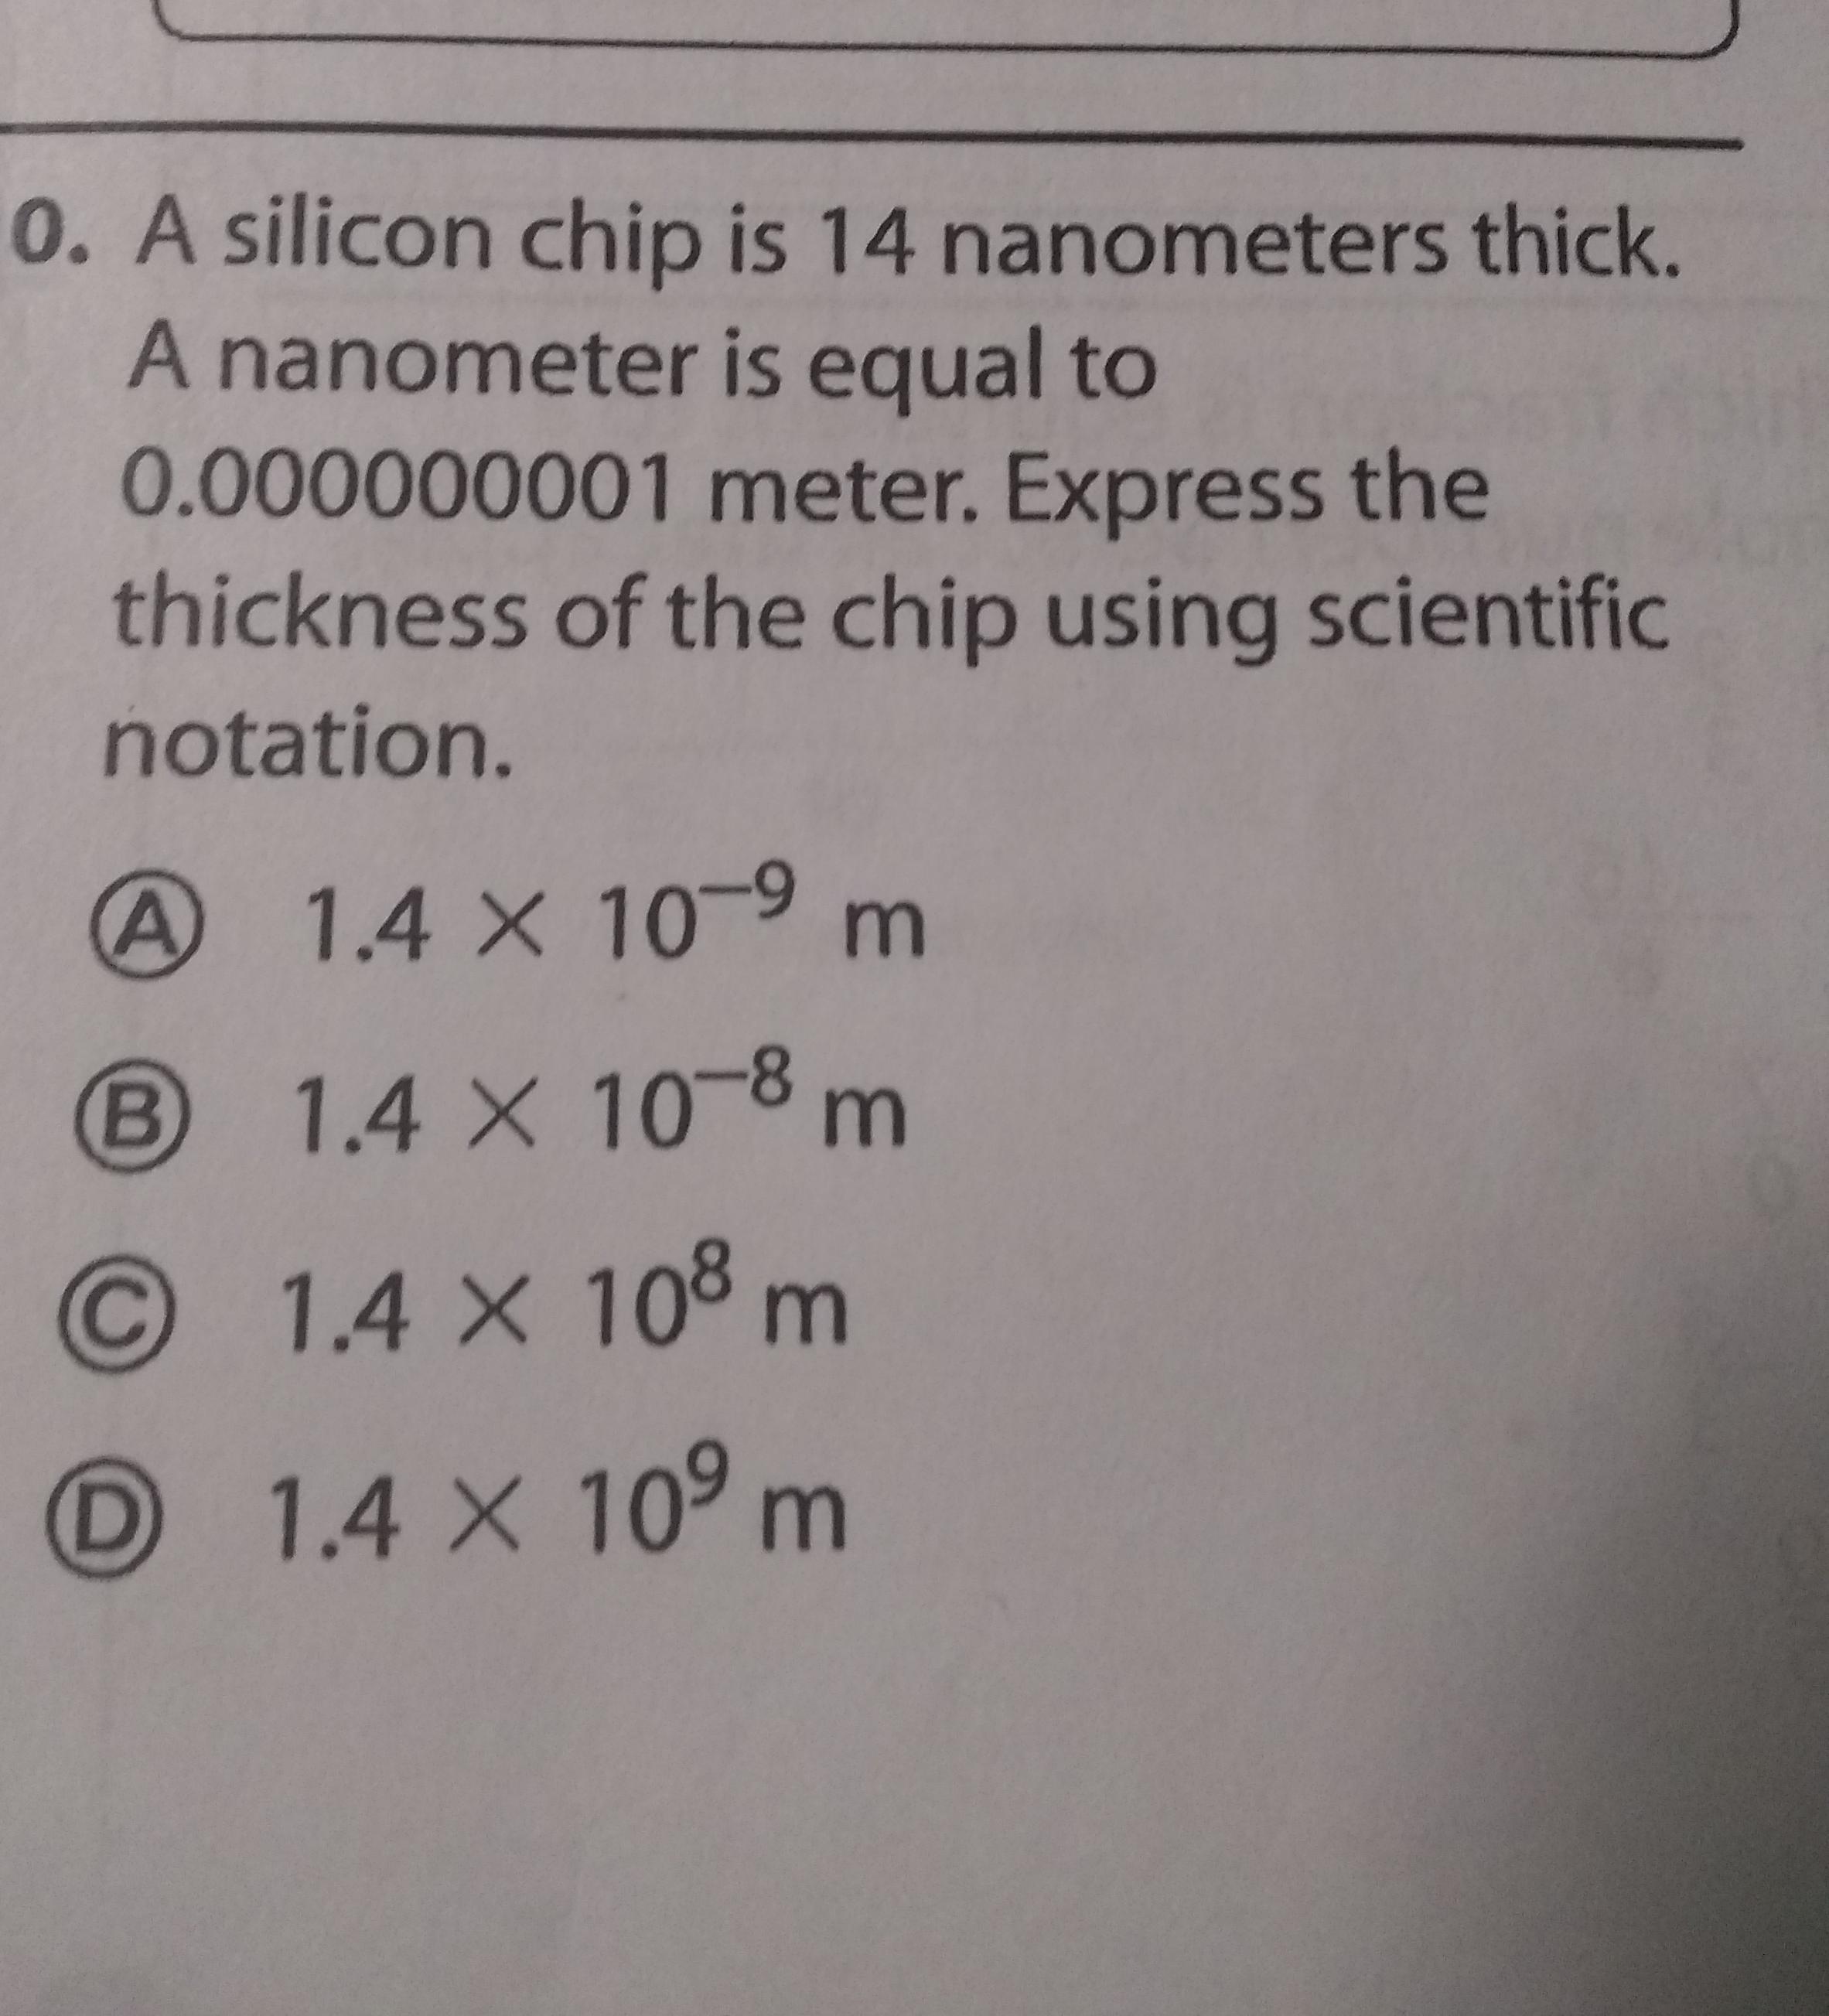 Achtervoegsel Handelsmerk Refrein ee 8. A silicon chip is 14 nanometers thick. A nanometer is | Quizlet